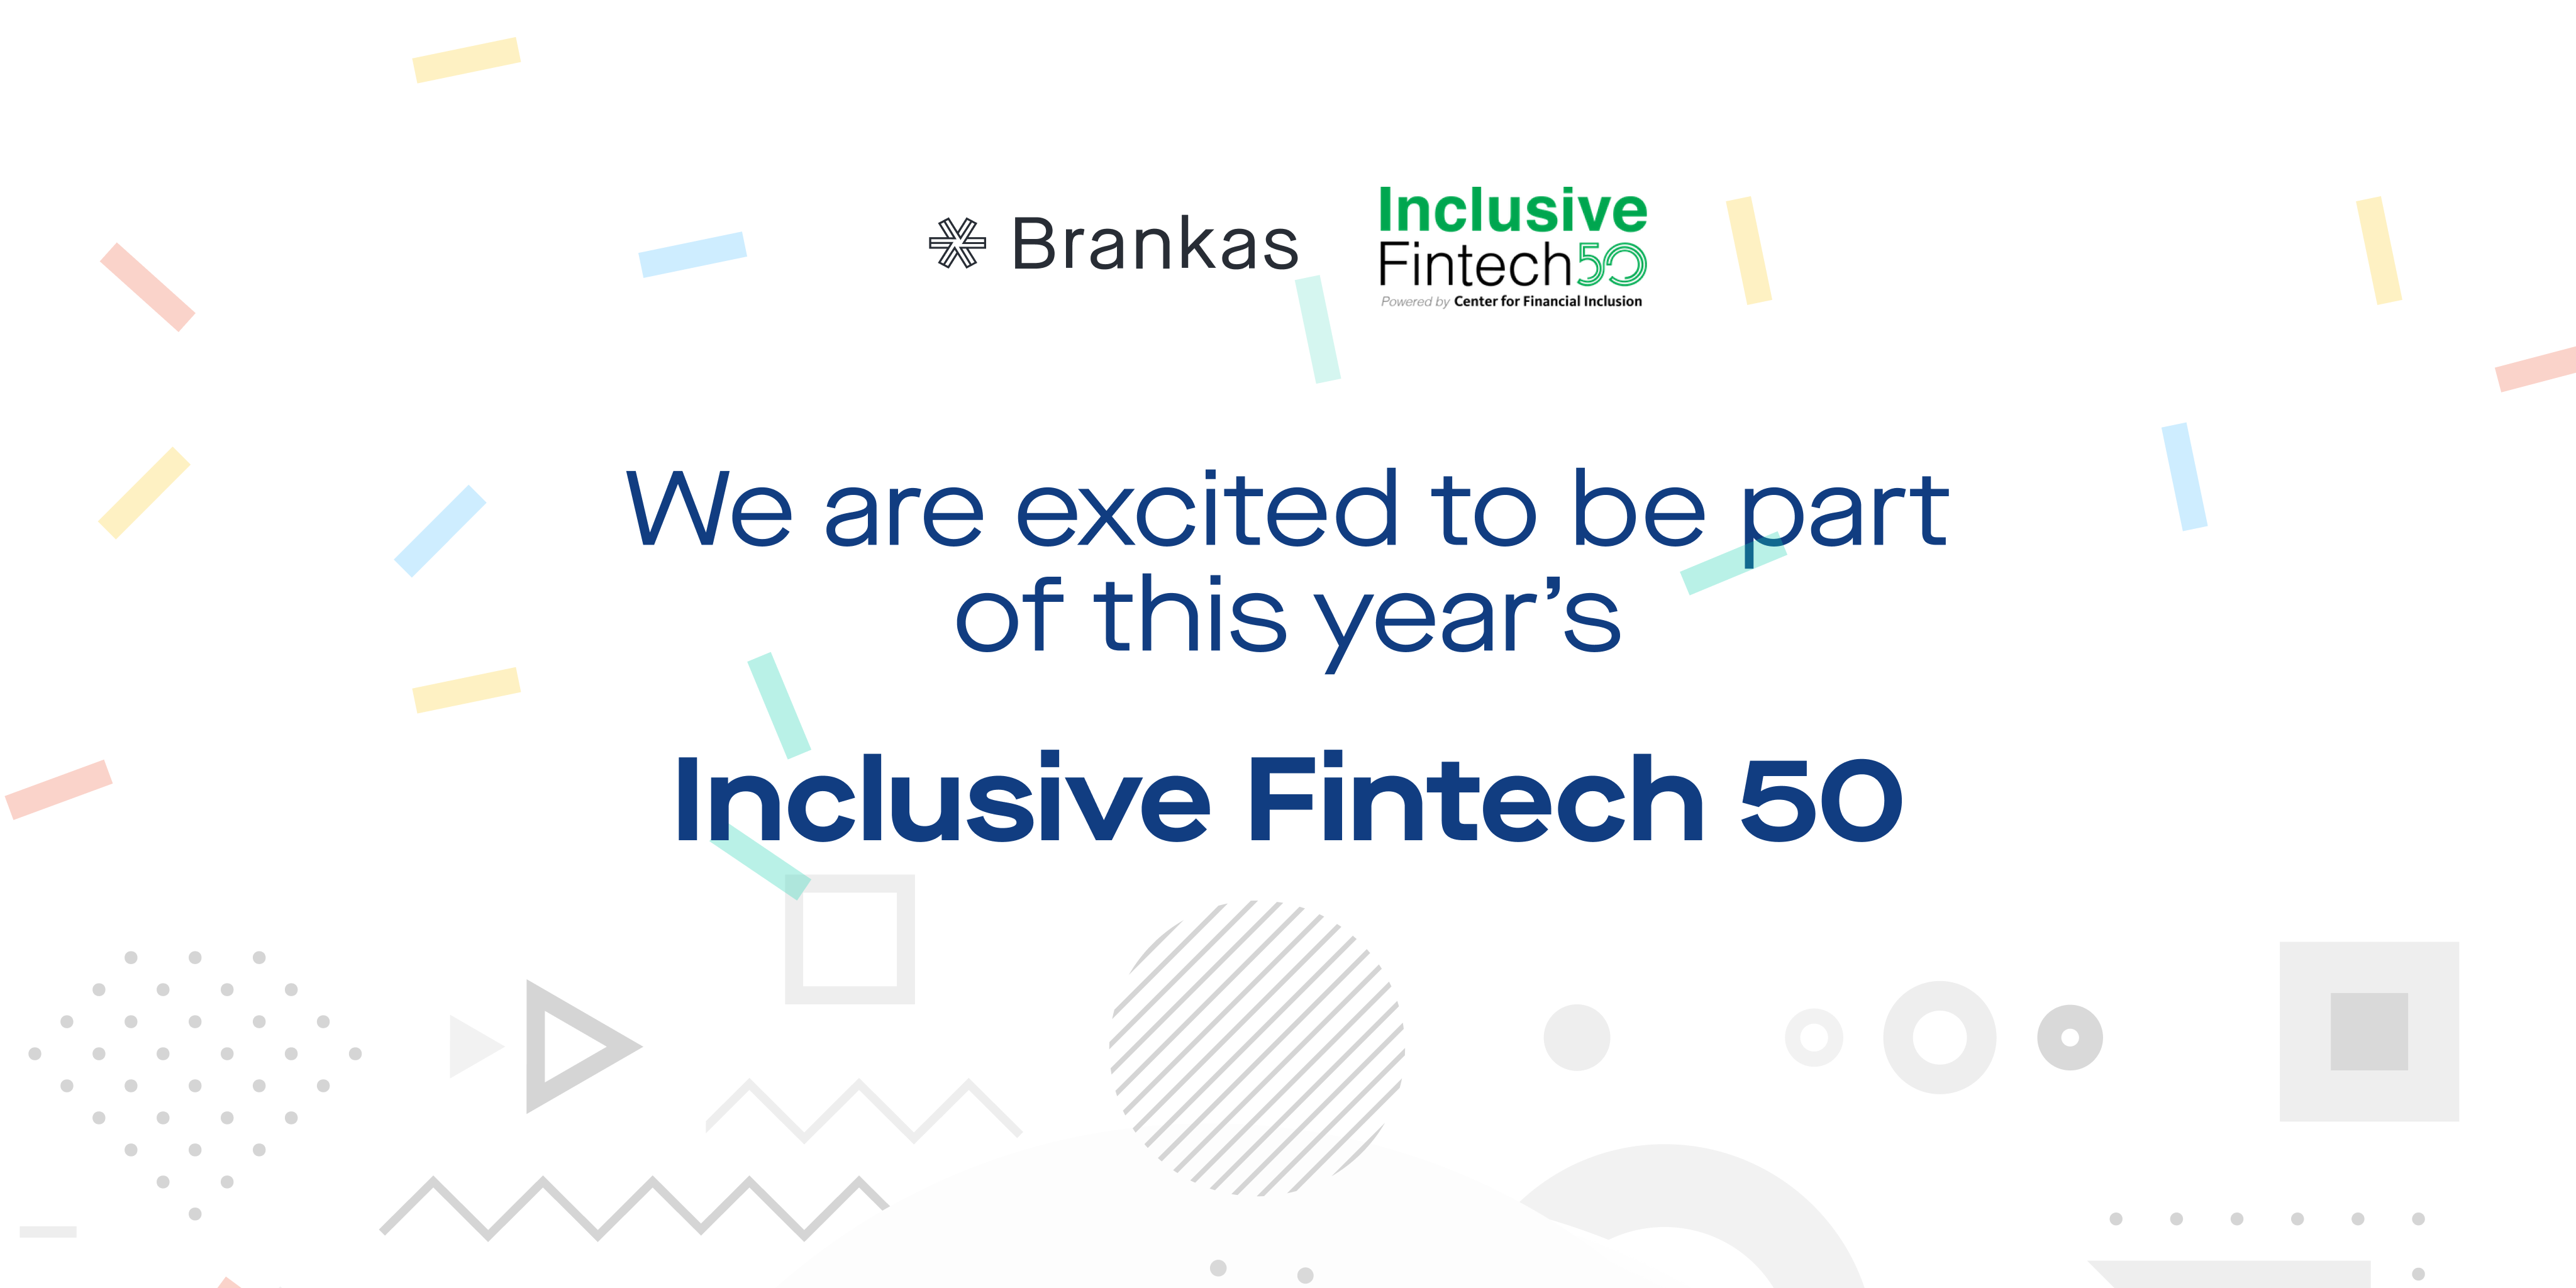 Brankas Recognized as a Global Inclusive Fintech Leader